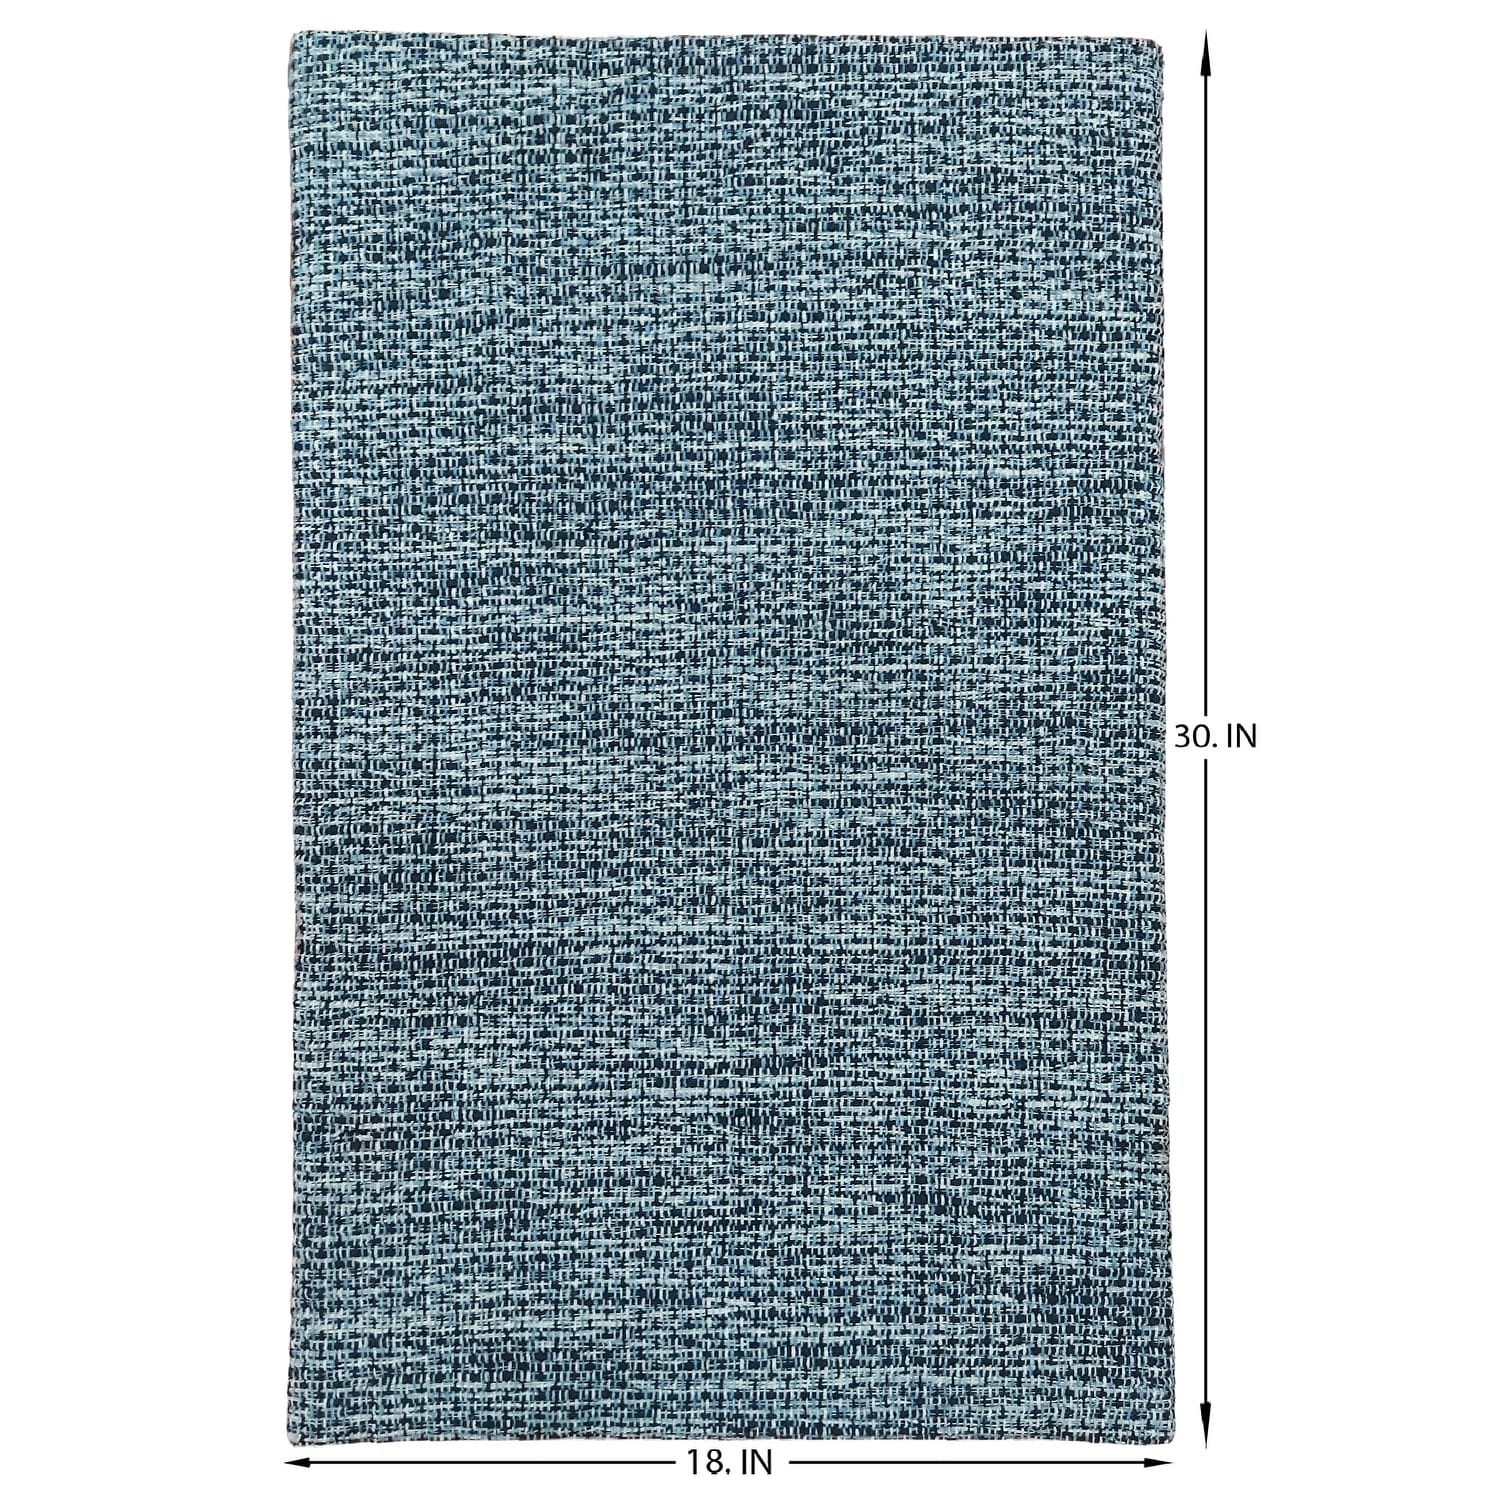 https://ak1.ostkcdn.com/images/products/is/images/direct/26a9abcb0dc2e7159bd69e6cda036034c9630dc2/Woven-Cotton-Anti-Fatigue-Cushioned-Kitchen-%7C-Doormat-%7C-Bathroom-18%22-x-30%22-Mats-With-Foam-Backing-Anti-Slip.jpg